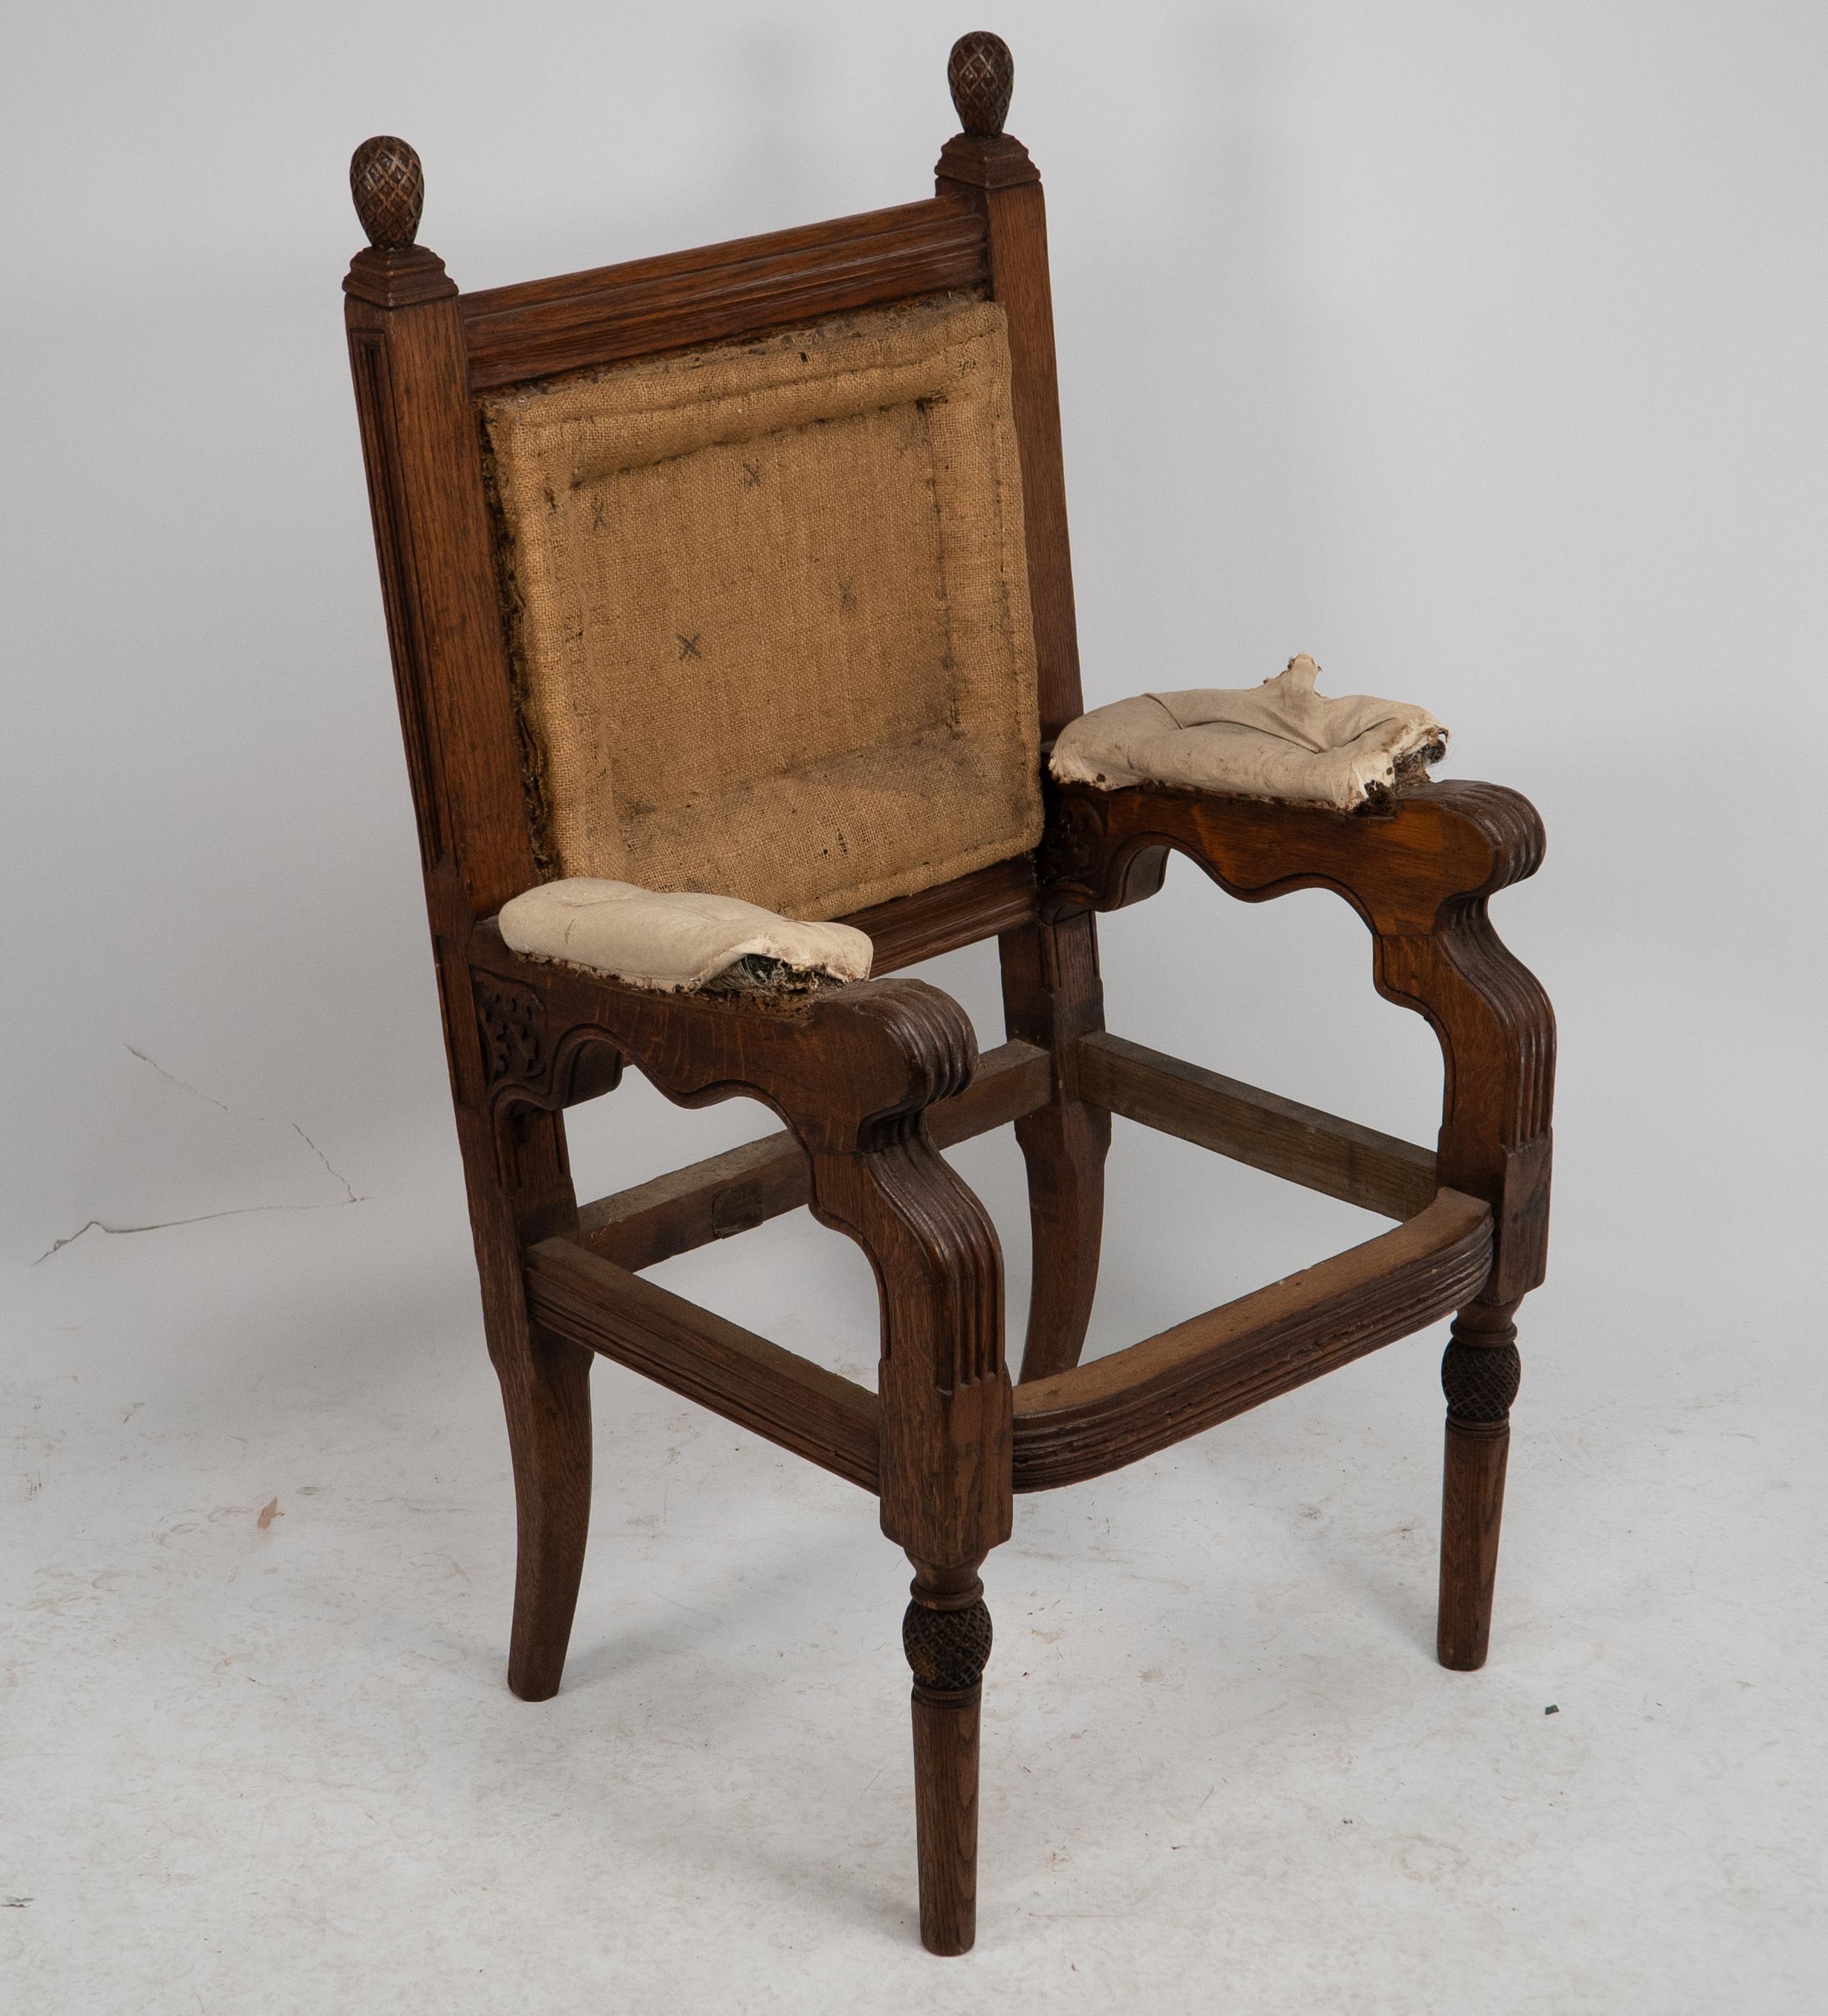 George Edmund Street. Judges armchair designed for The Royal Courts of Justice. For Sale